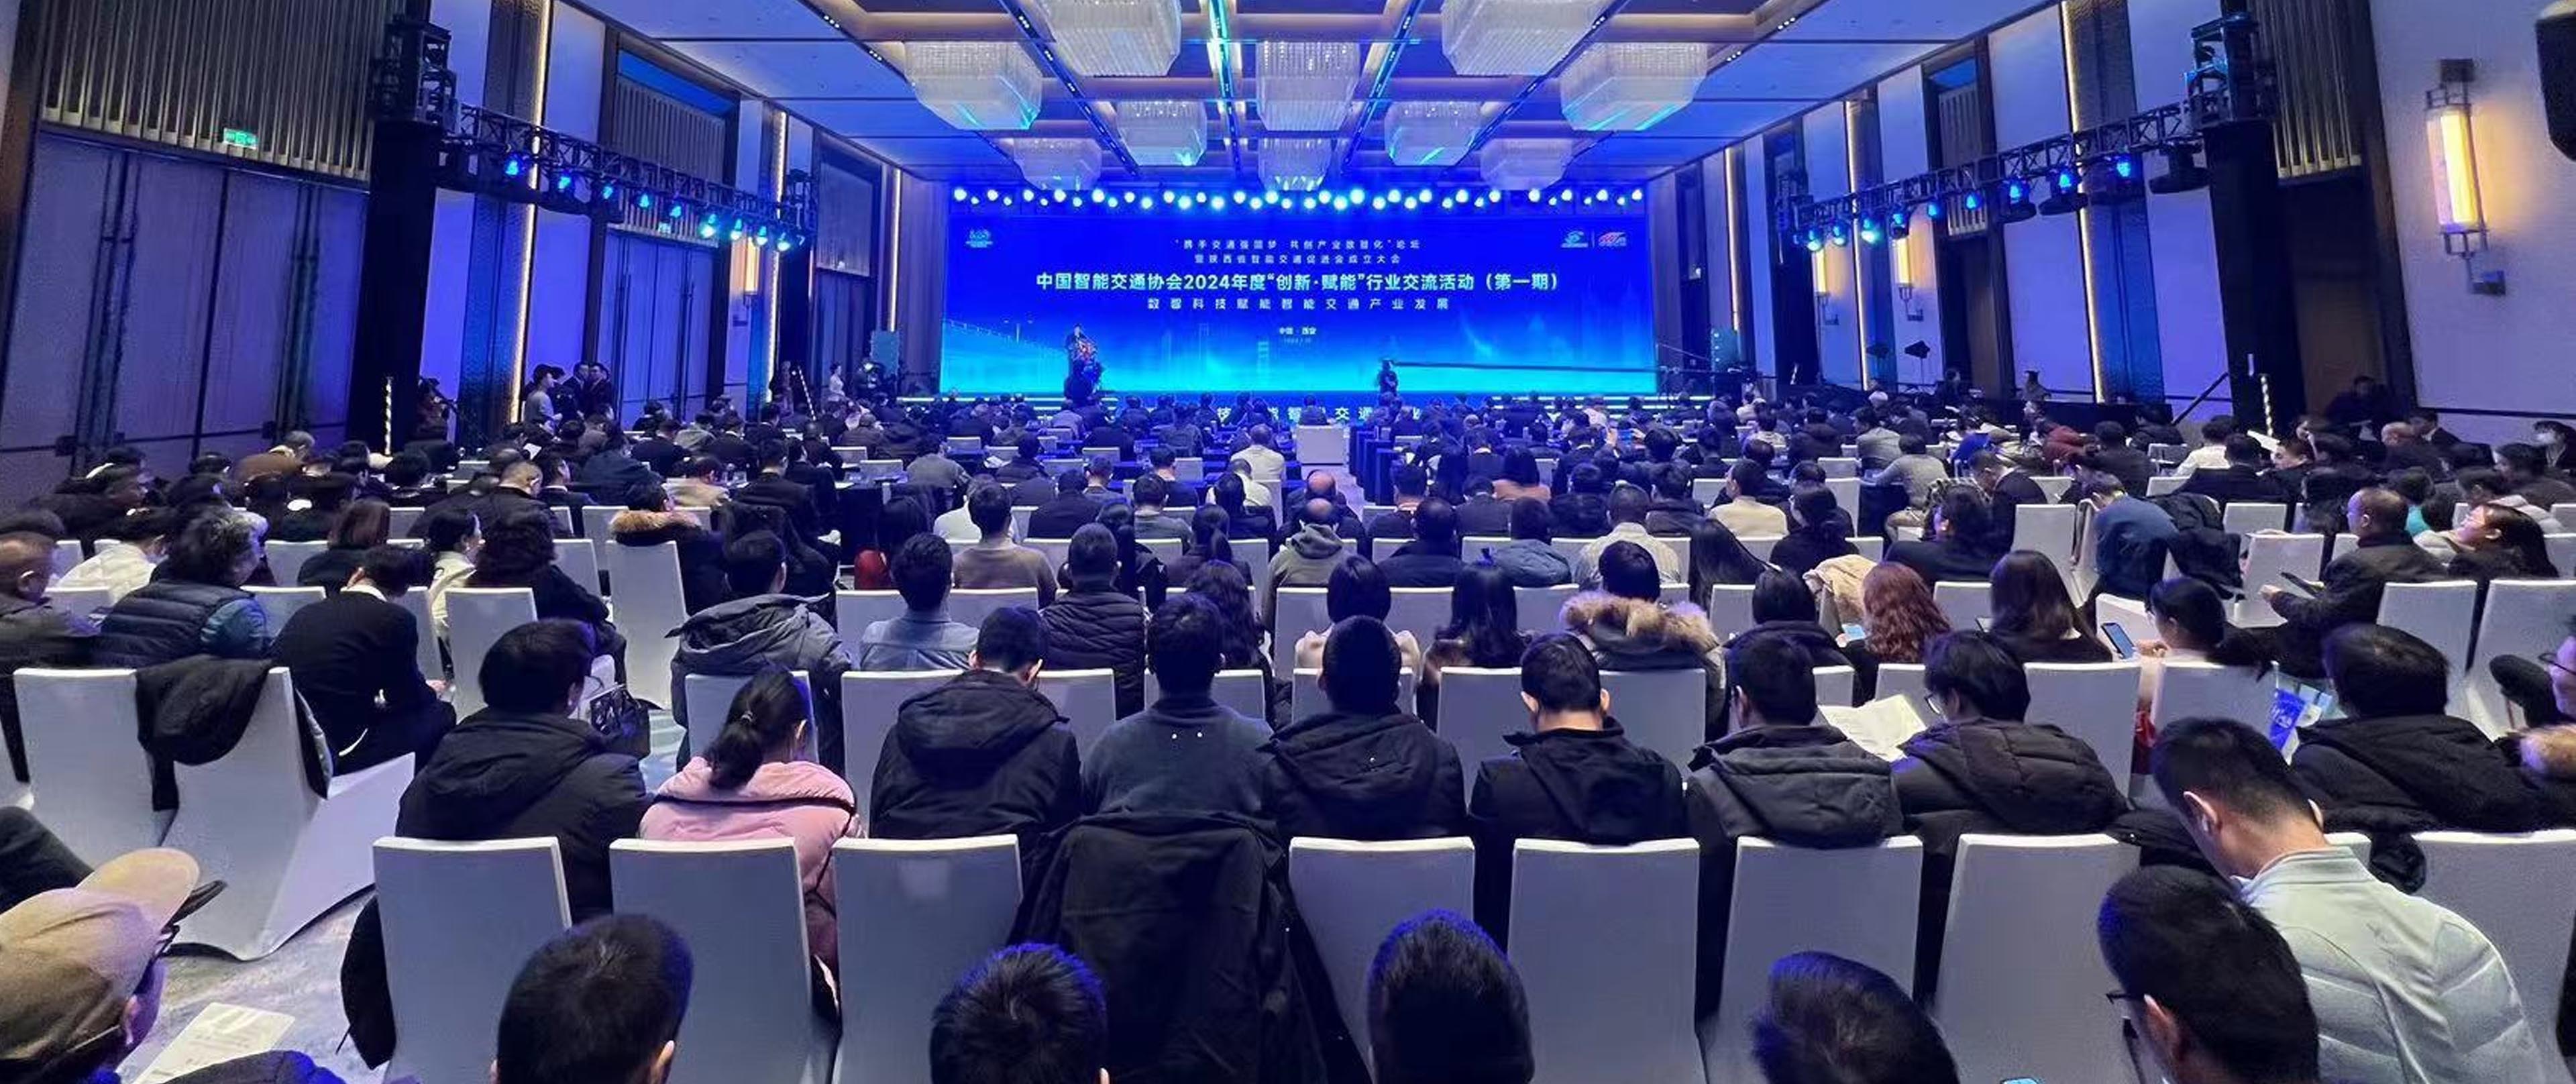 The 2024 Association’s “Innovation and Empowerment” Industry Exchange Event (Phase 1) was successfully held in Nanjing